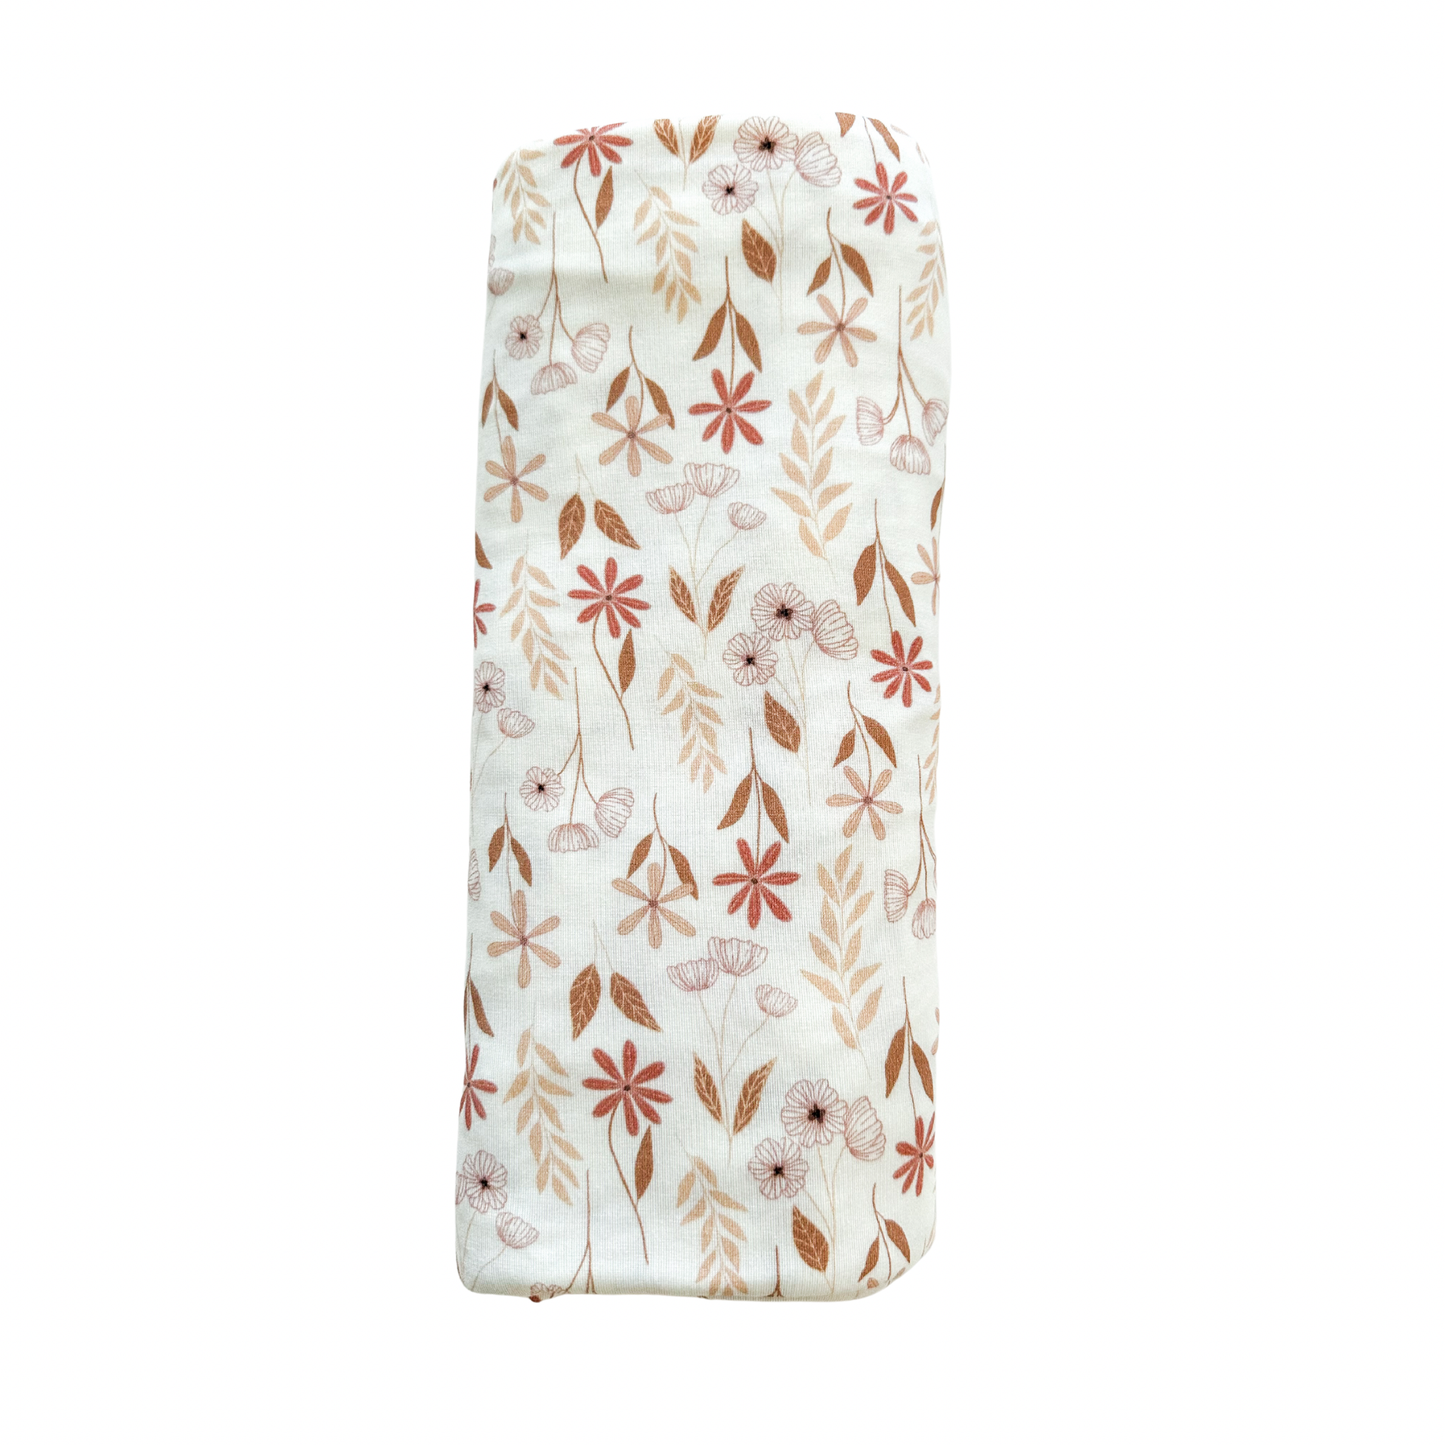 Bamboo Stretch Swaddle - Wildflower